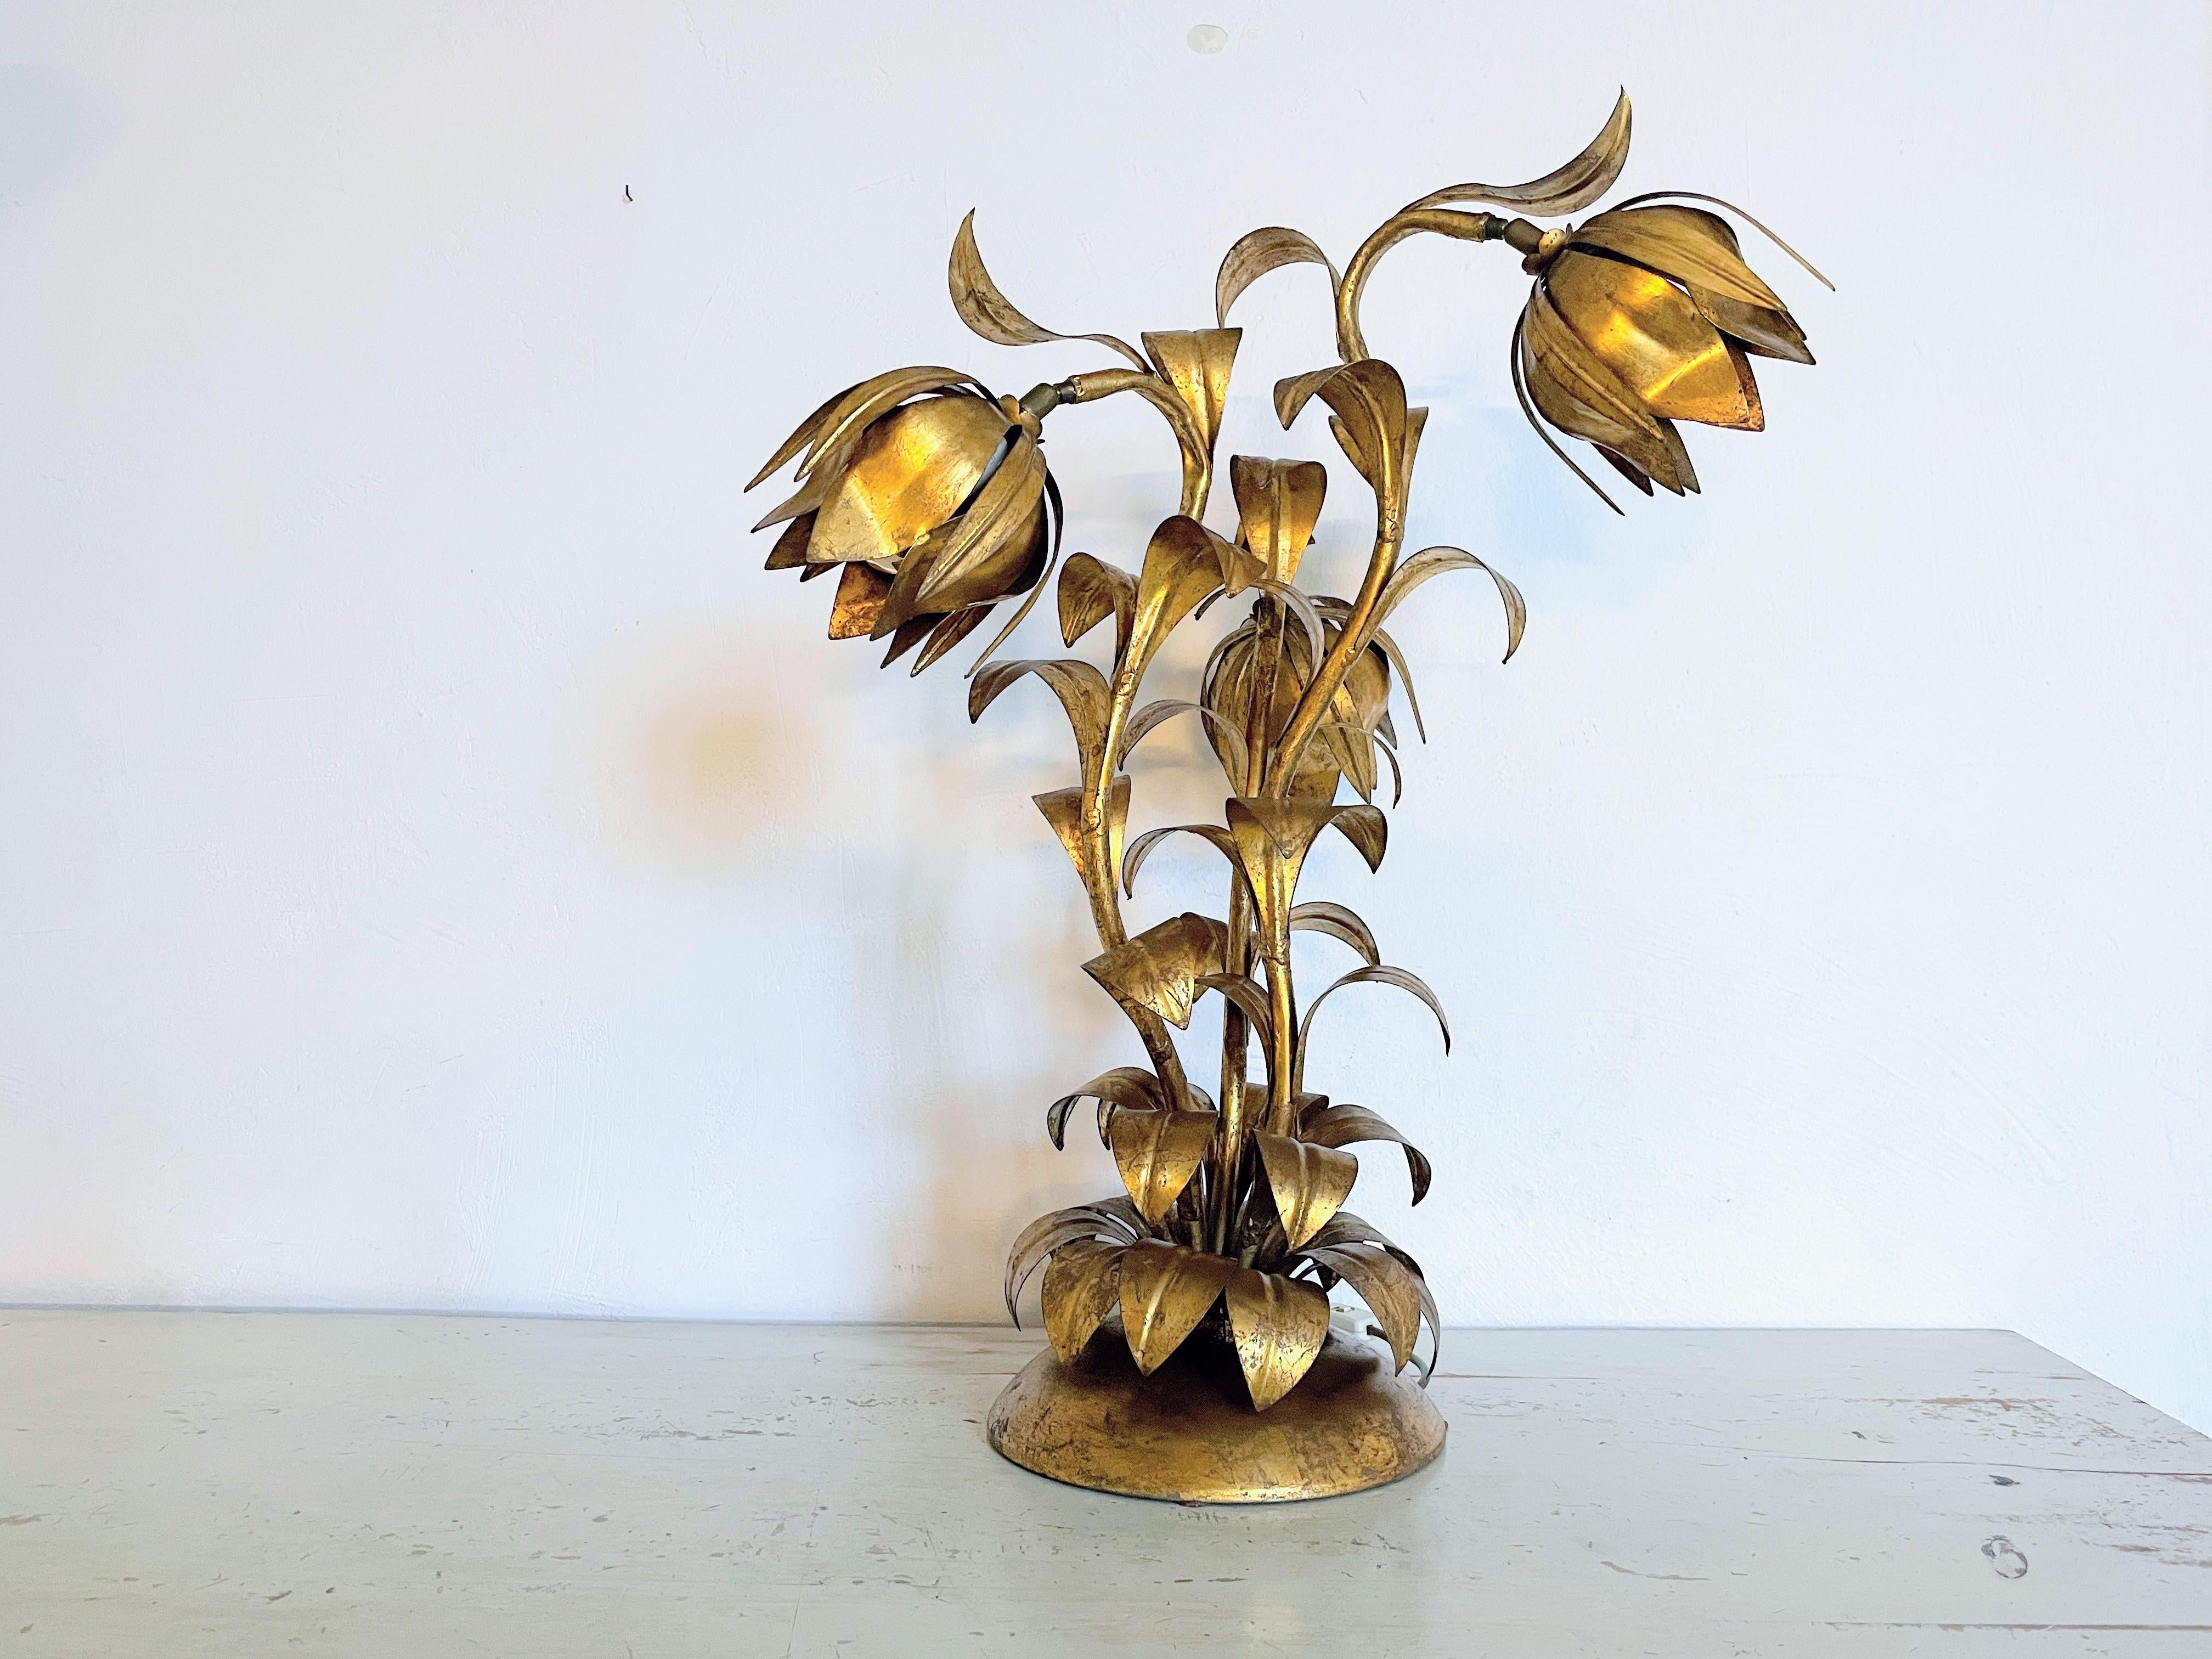 mmerse yourself in the world of timeless glamour with our opulent table lamp in Hollywood Regency style, embodying a three-stemmed flower design attributed to Koegl.

This artful lamp seamlessly blends playful design with extravagant elegance.